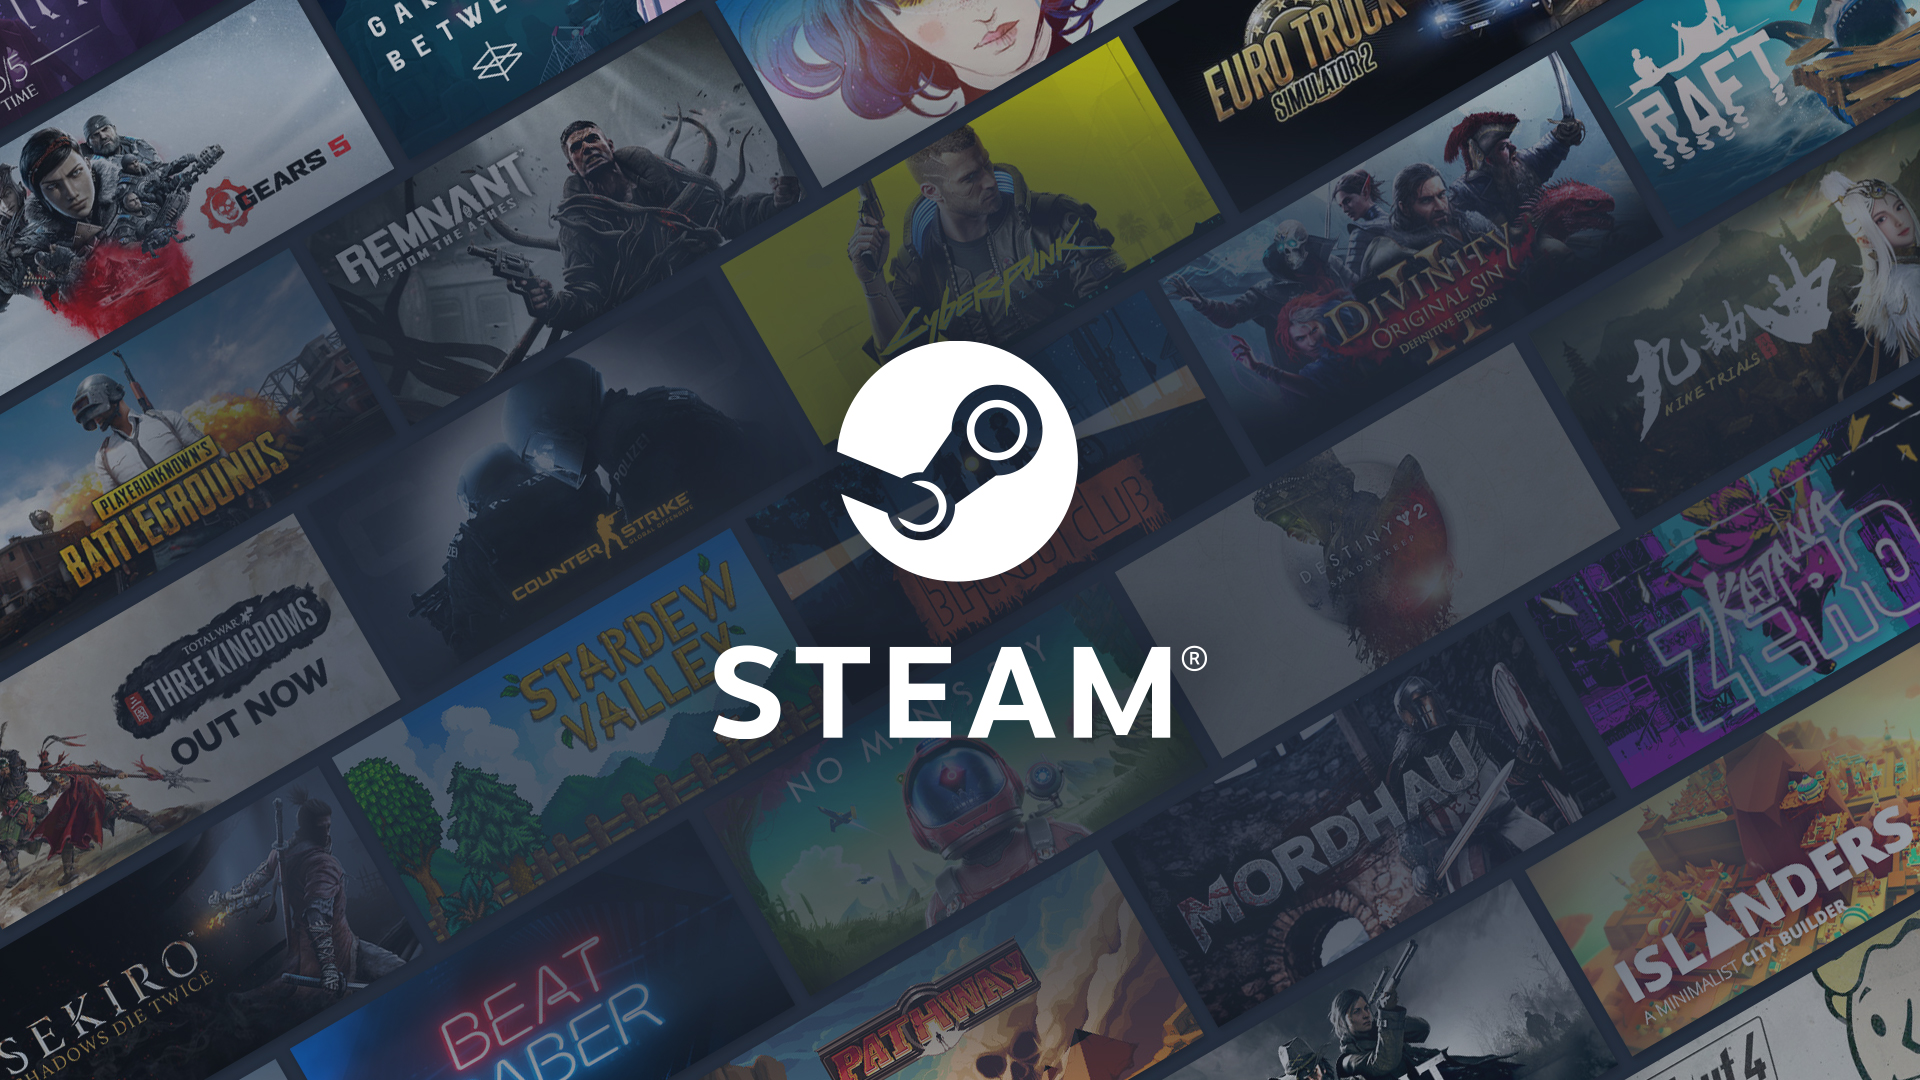 Looks like dates for the next Steam sales have leaked